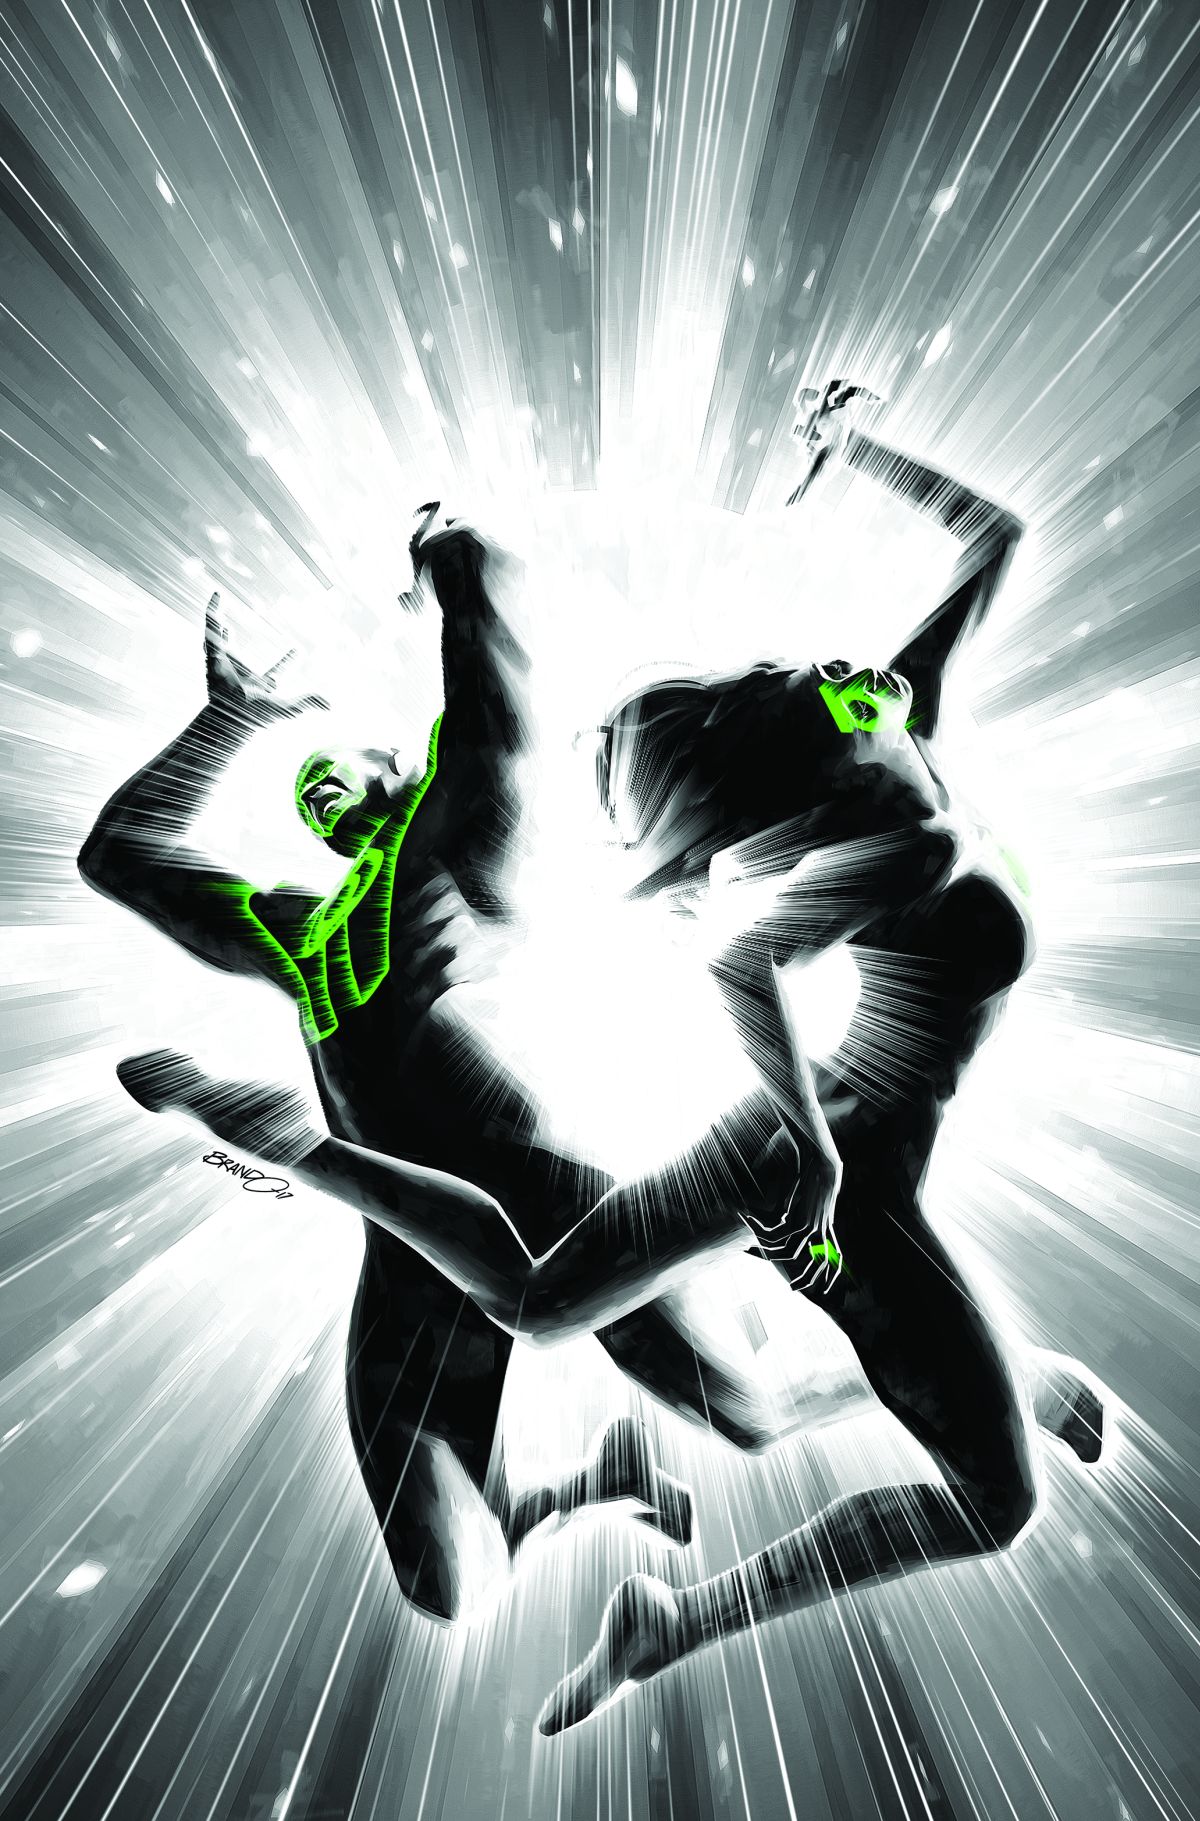 GREEN LANTERNS VOL. 6: A WORLD OF OUR OWN TP